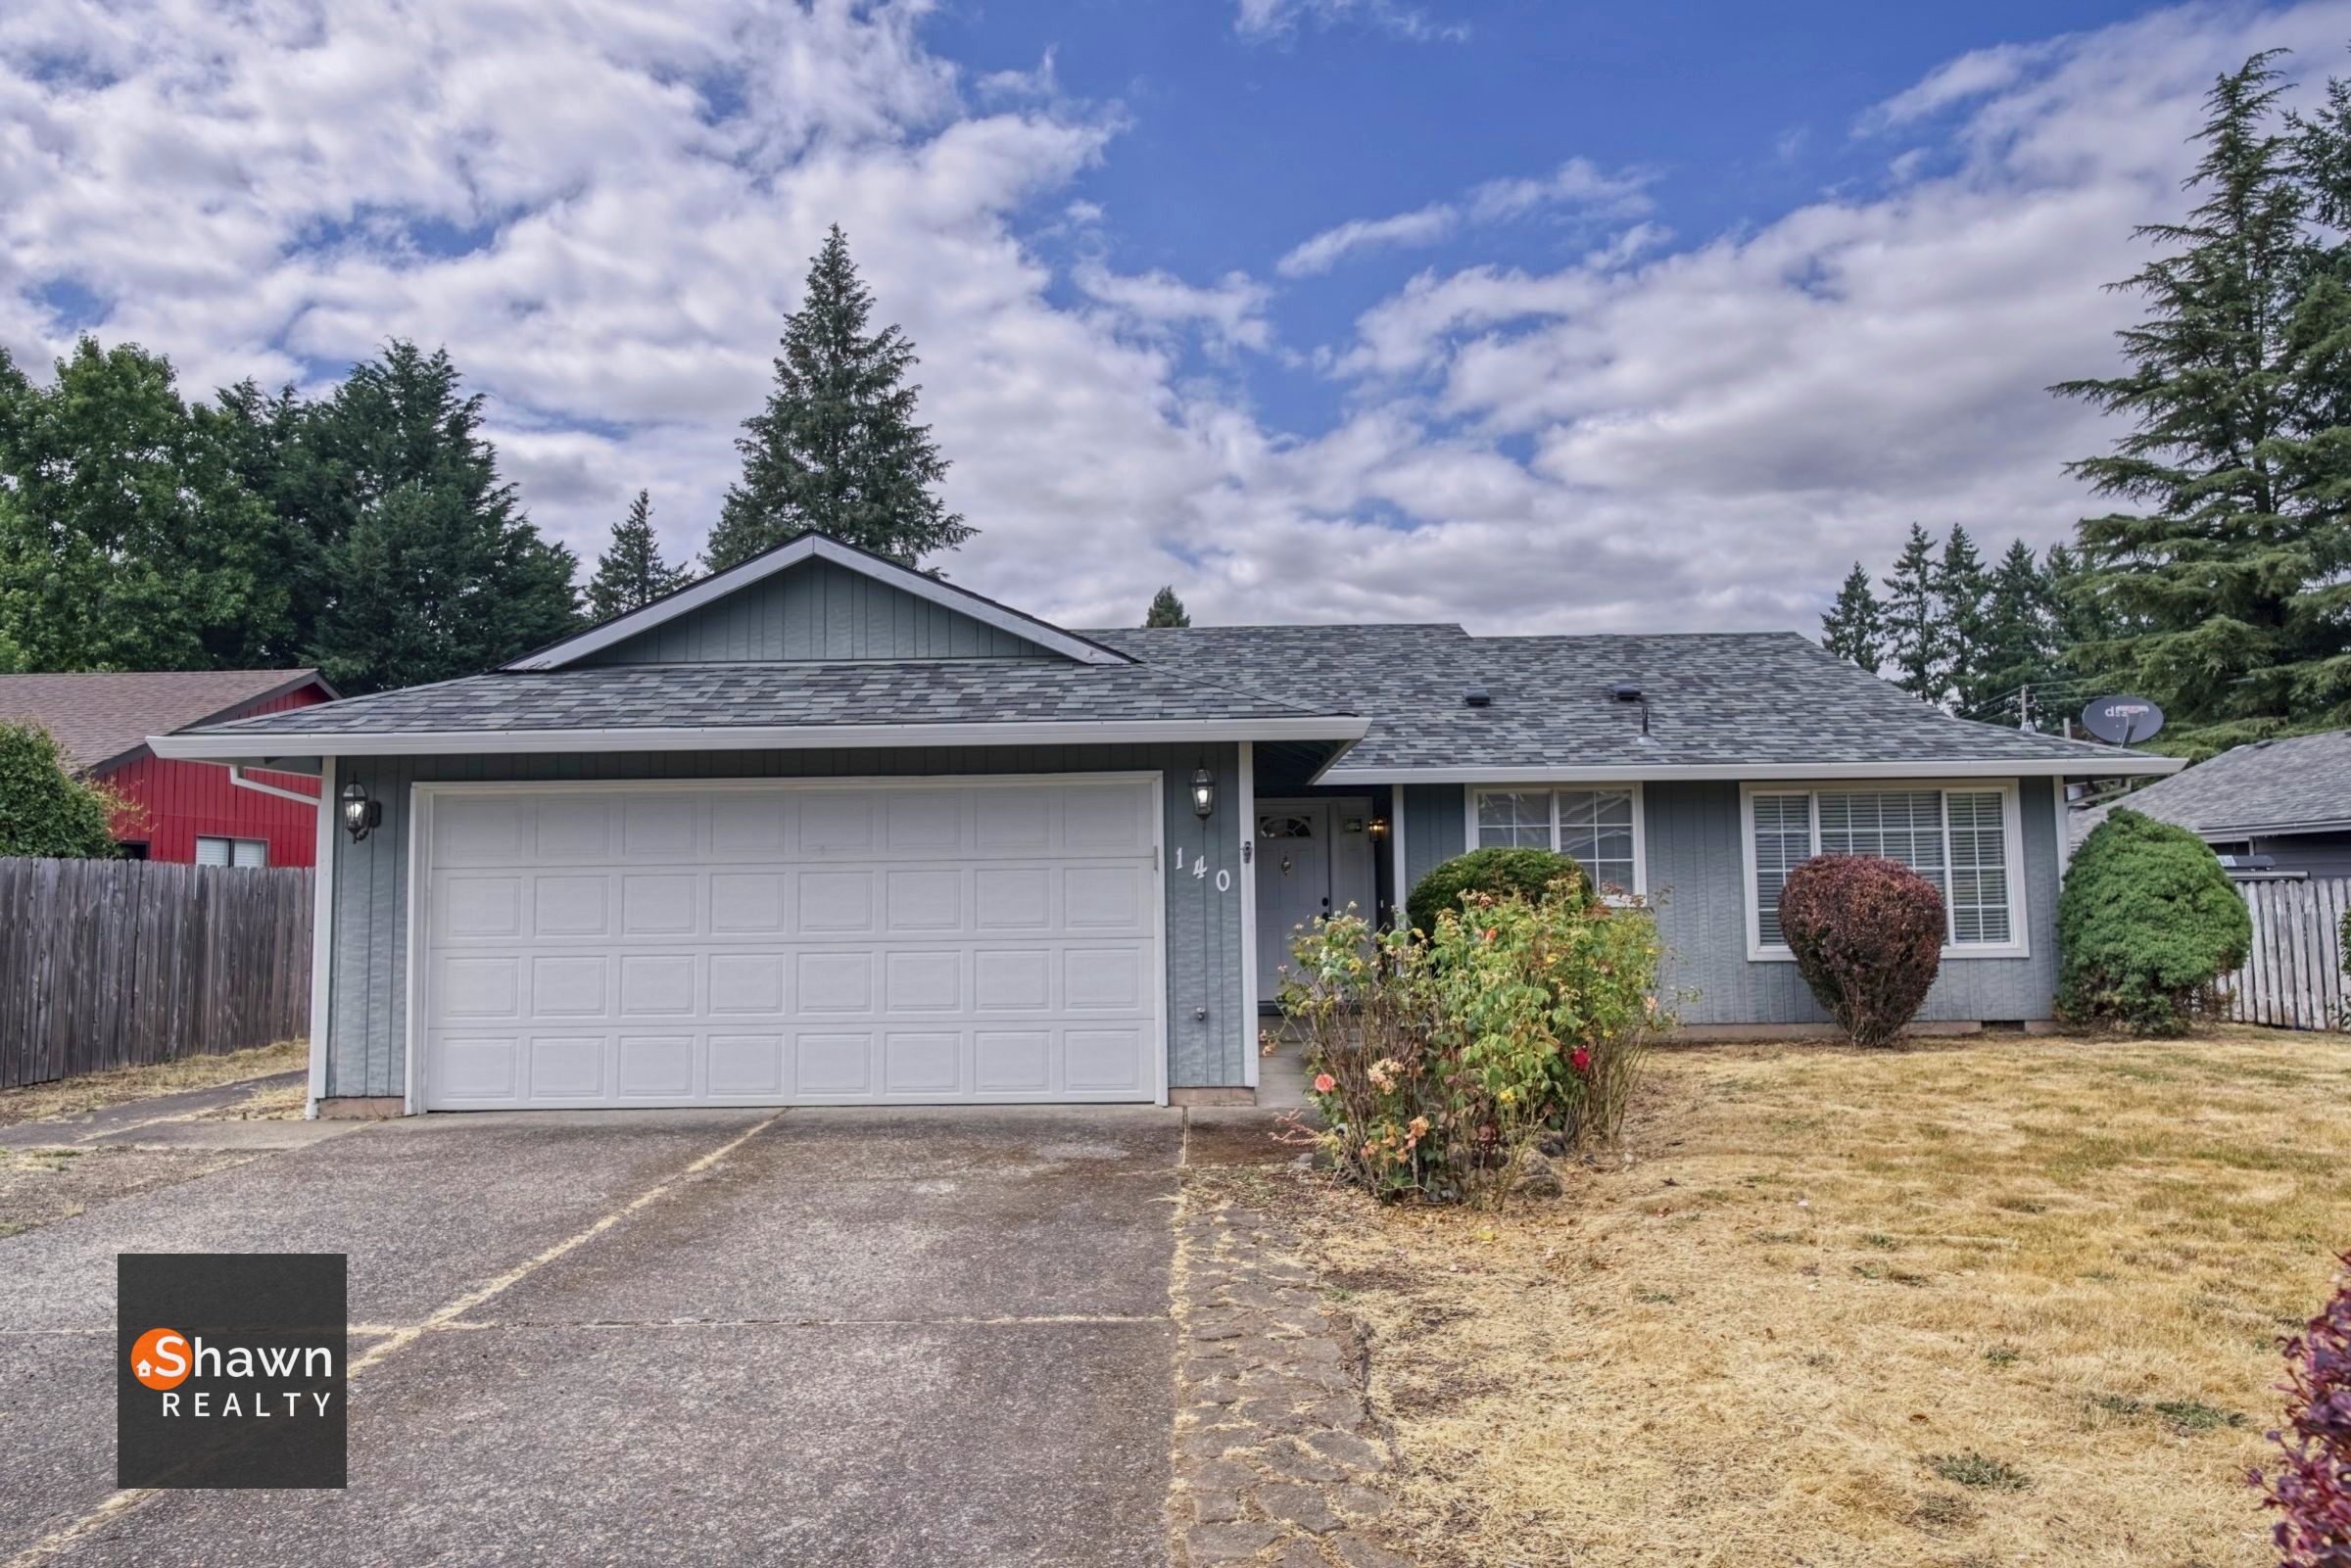 140 SW 8th Avenue, Canby, OR 97013 – Sold Exclusively By Shawn Realty